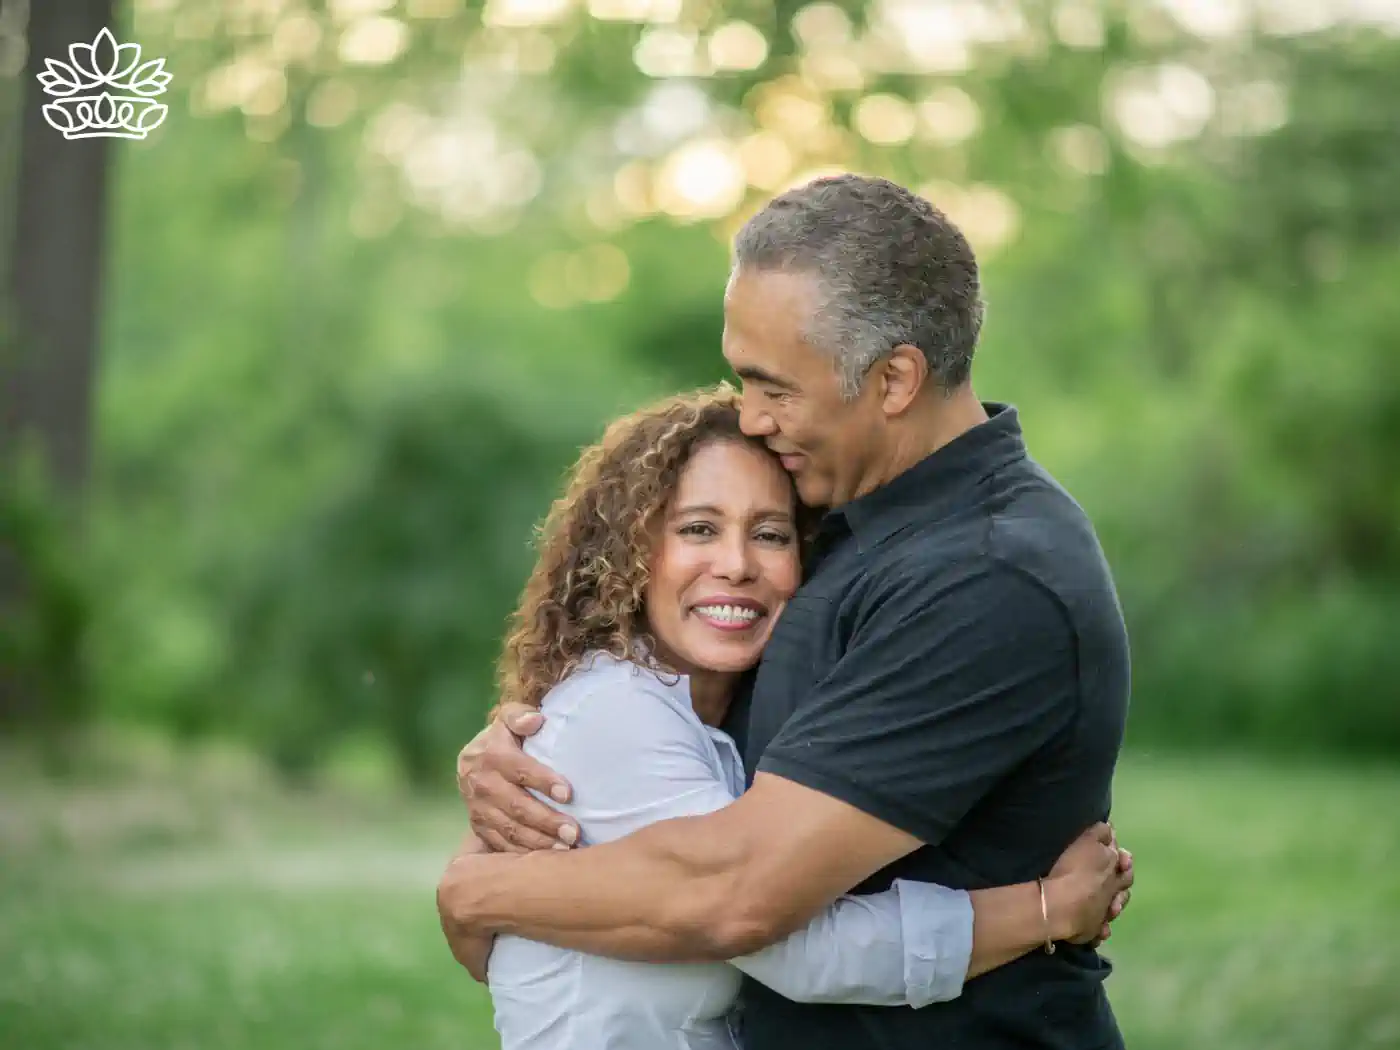 Joyful middle-aged couple embracing in a lush green park, sharing a moment of laughter and closeness, conveying happiness and love. 